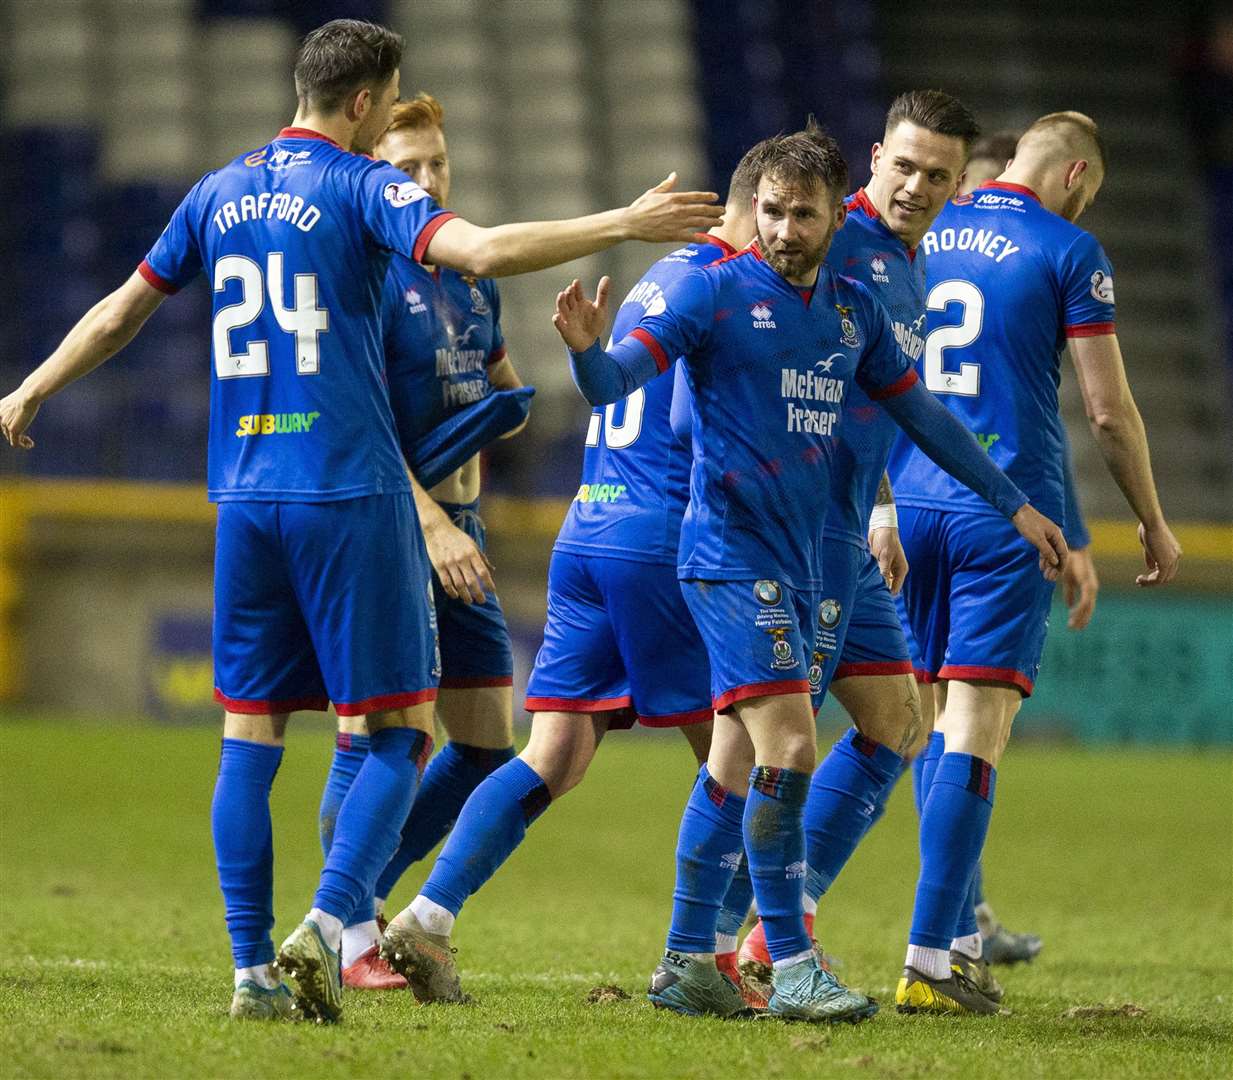 Picture - Ken Macpherson, Inverness. Inverness CT(3) v Queen of the South(1). 10.03.20. ICT's James Keatings celebrates his goal.